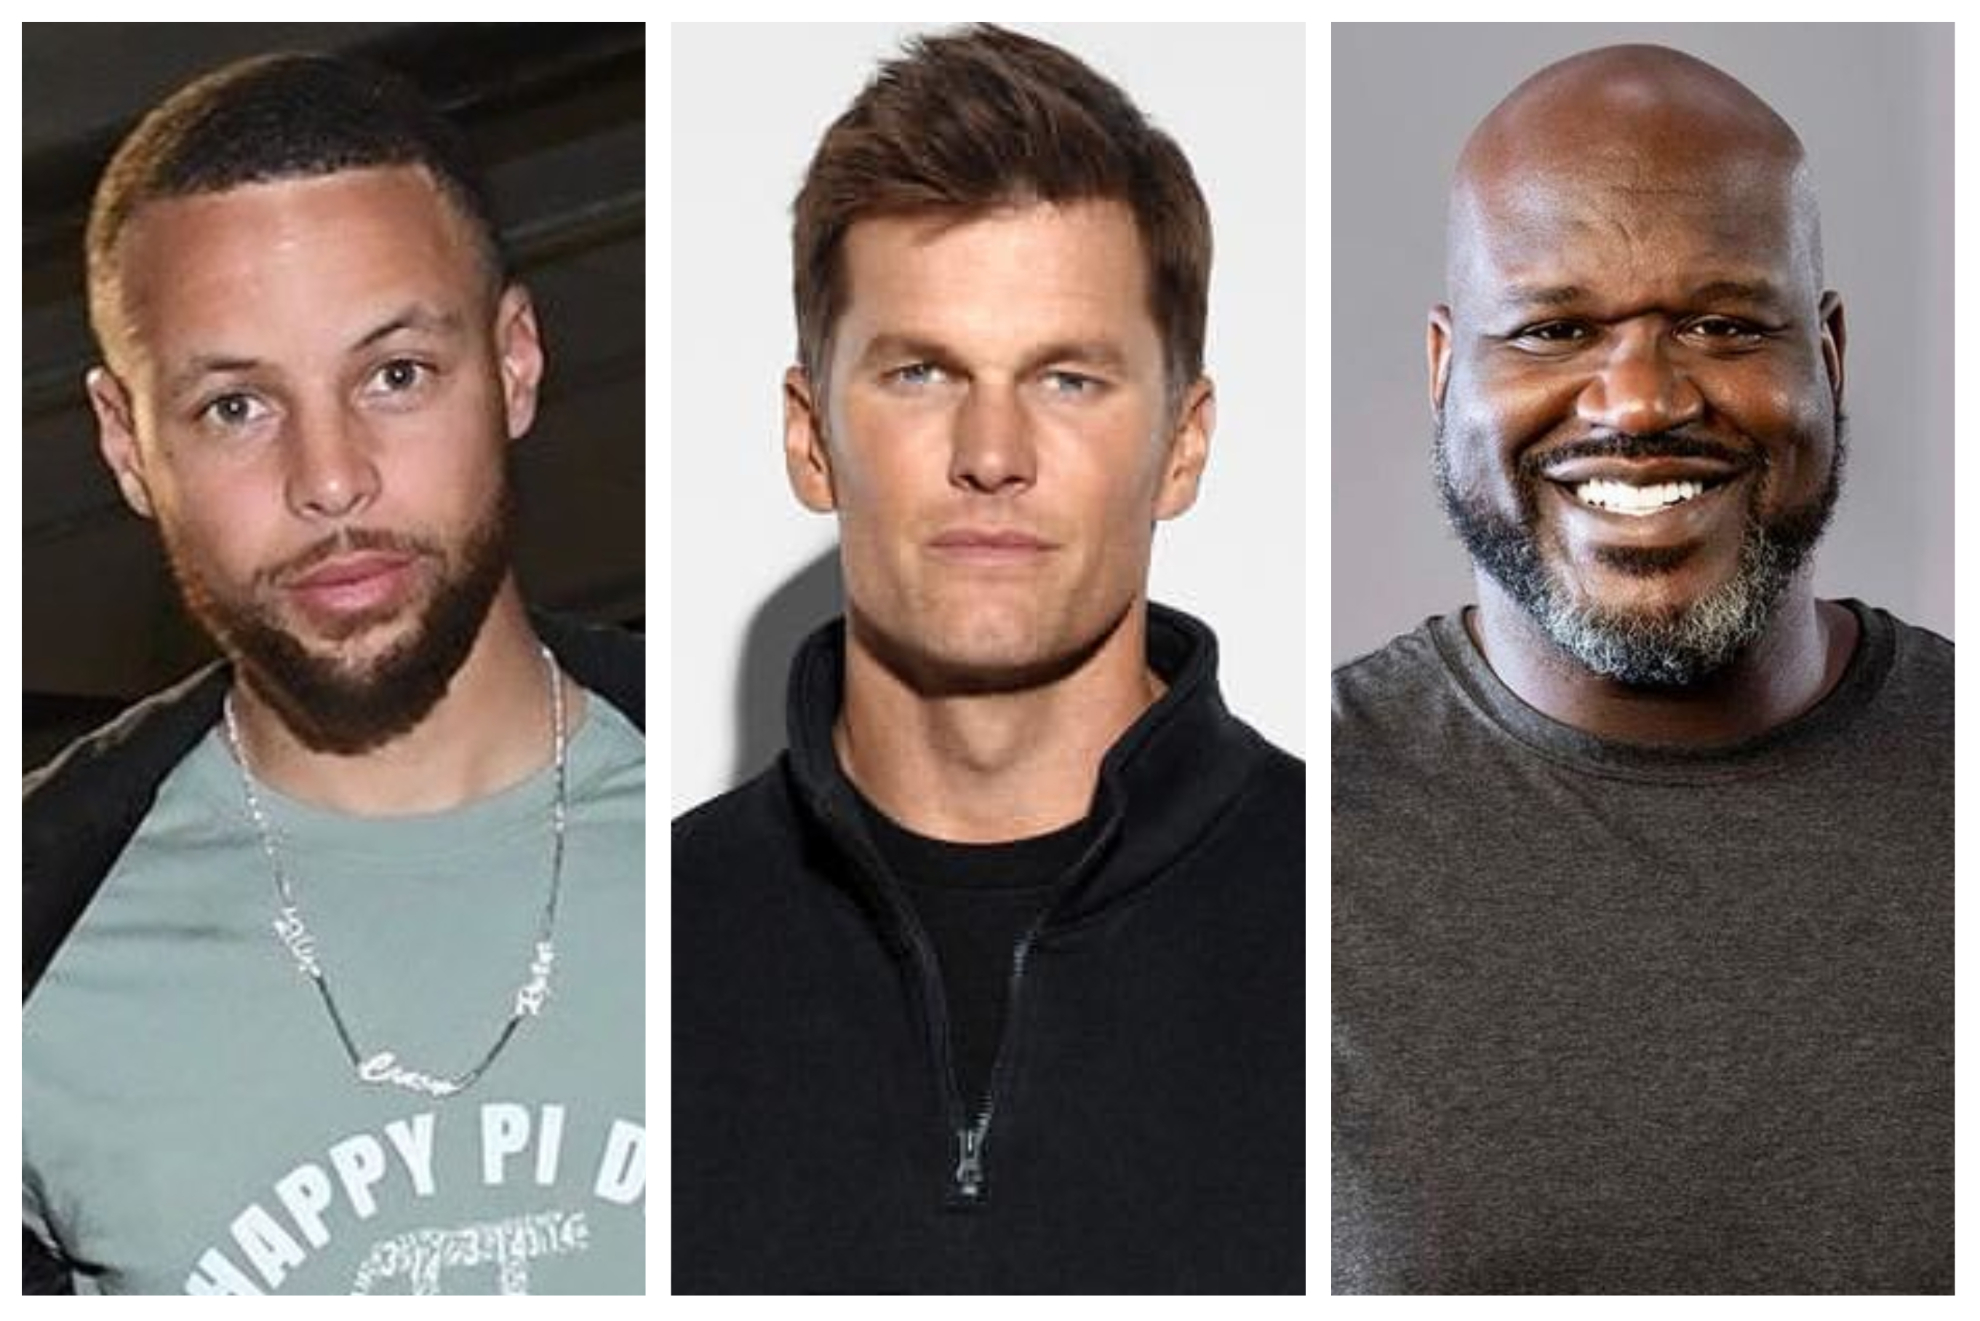 Stephen Curry, Tom Brady and Shaquille O'Neal